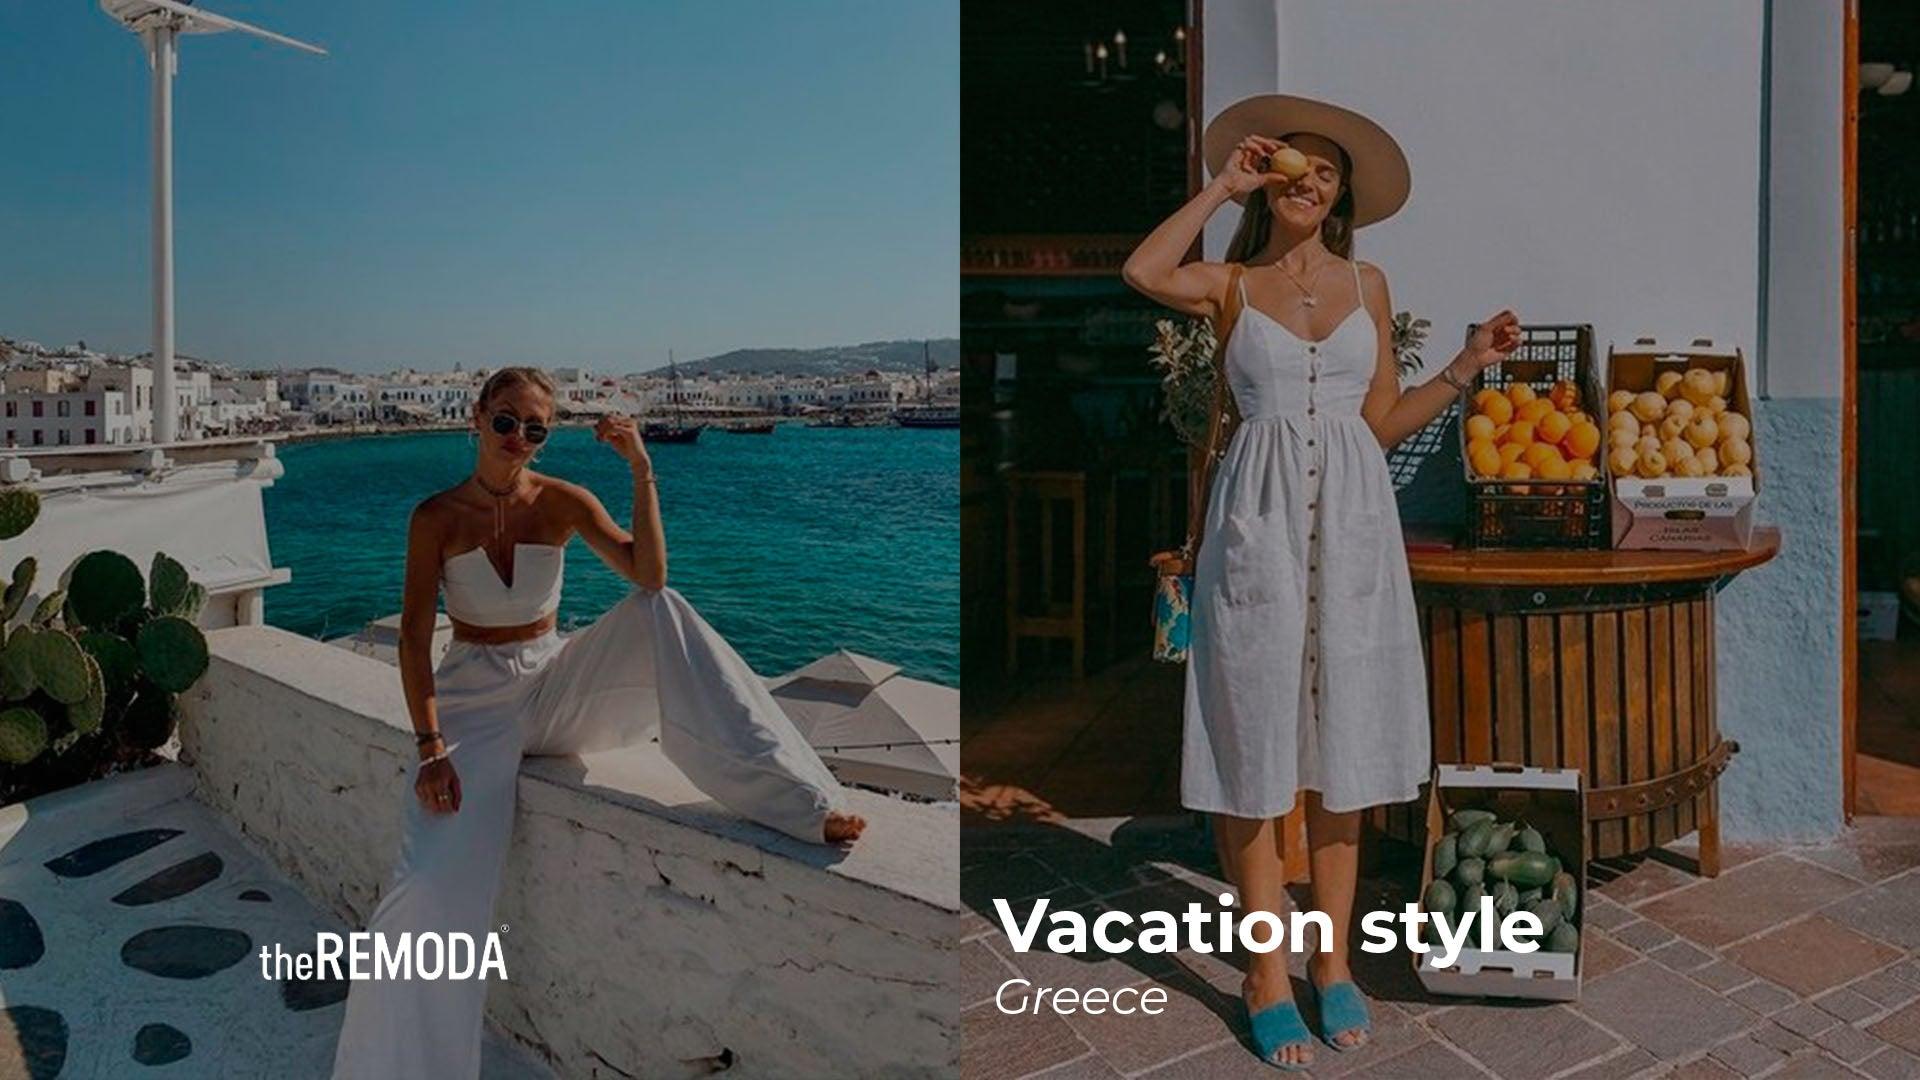 Vacation style: Greece - theREMODA